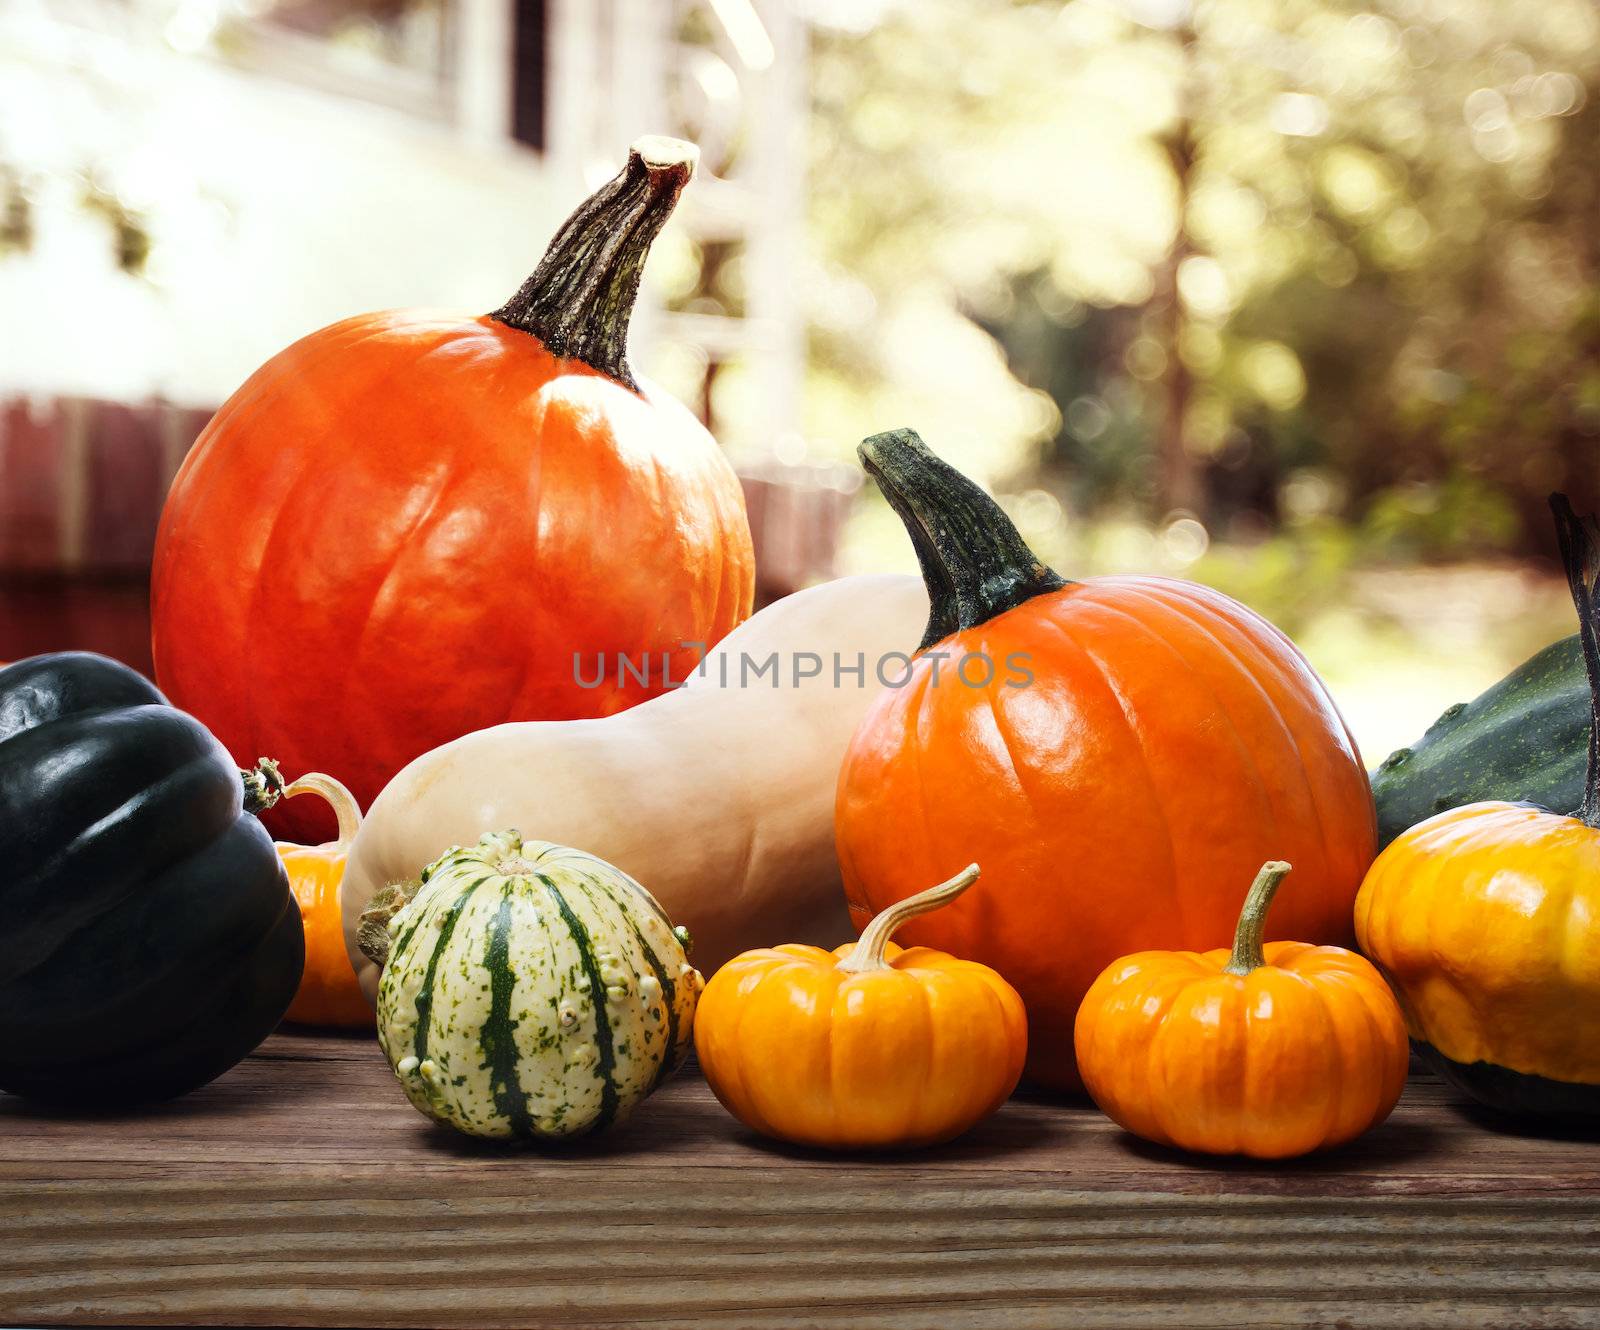 Varieties of pumpkins and squashes on rustic wooden boards with an shinning autumn garden backdrop